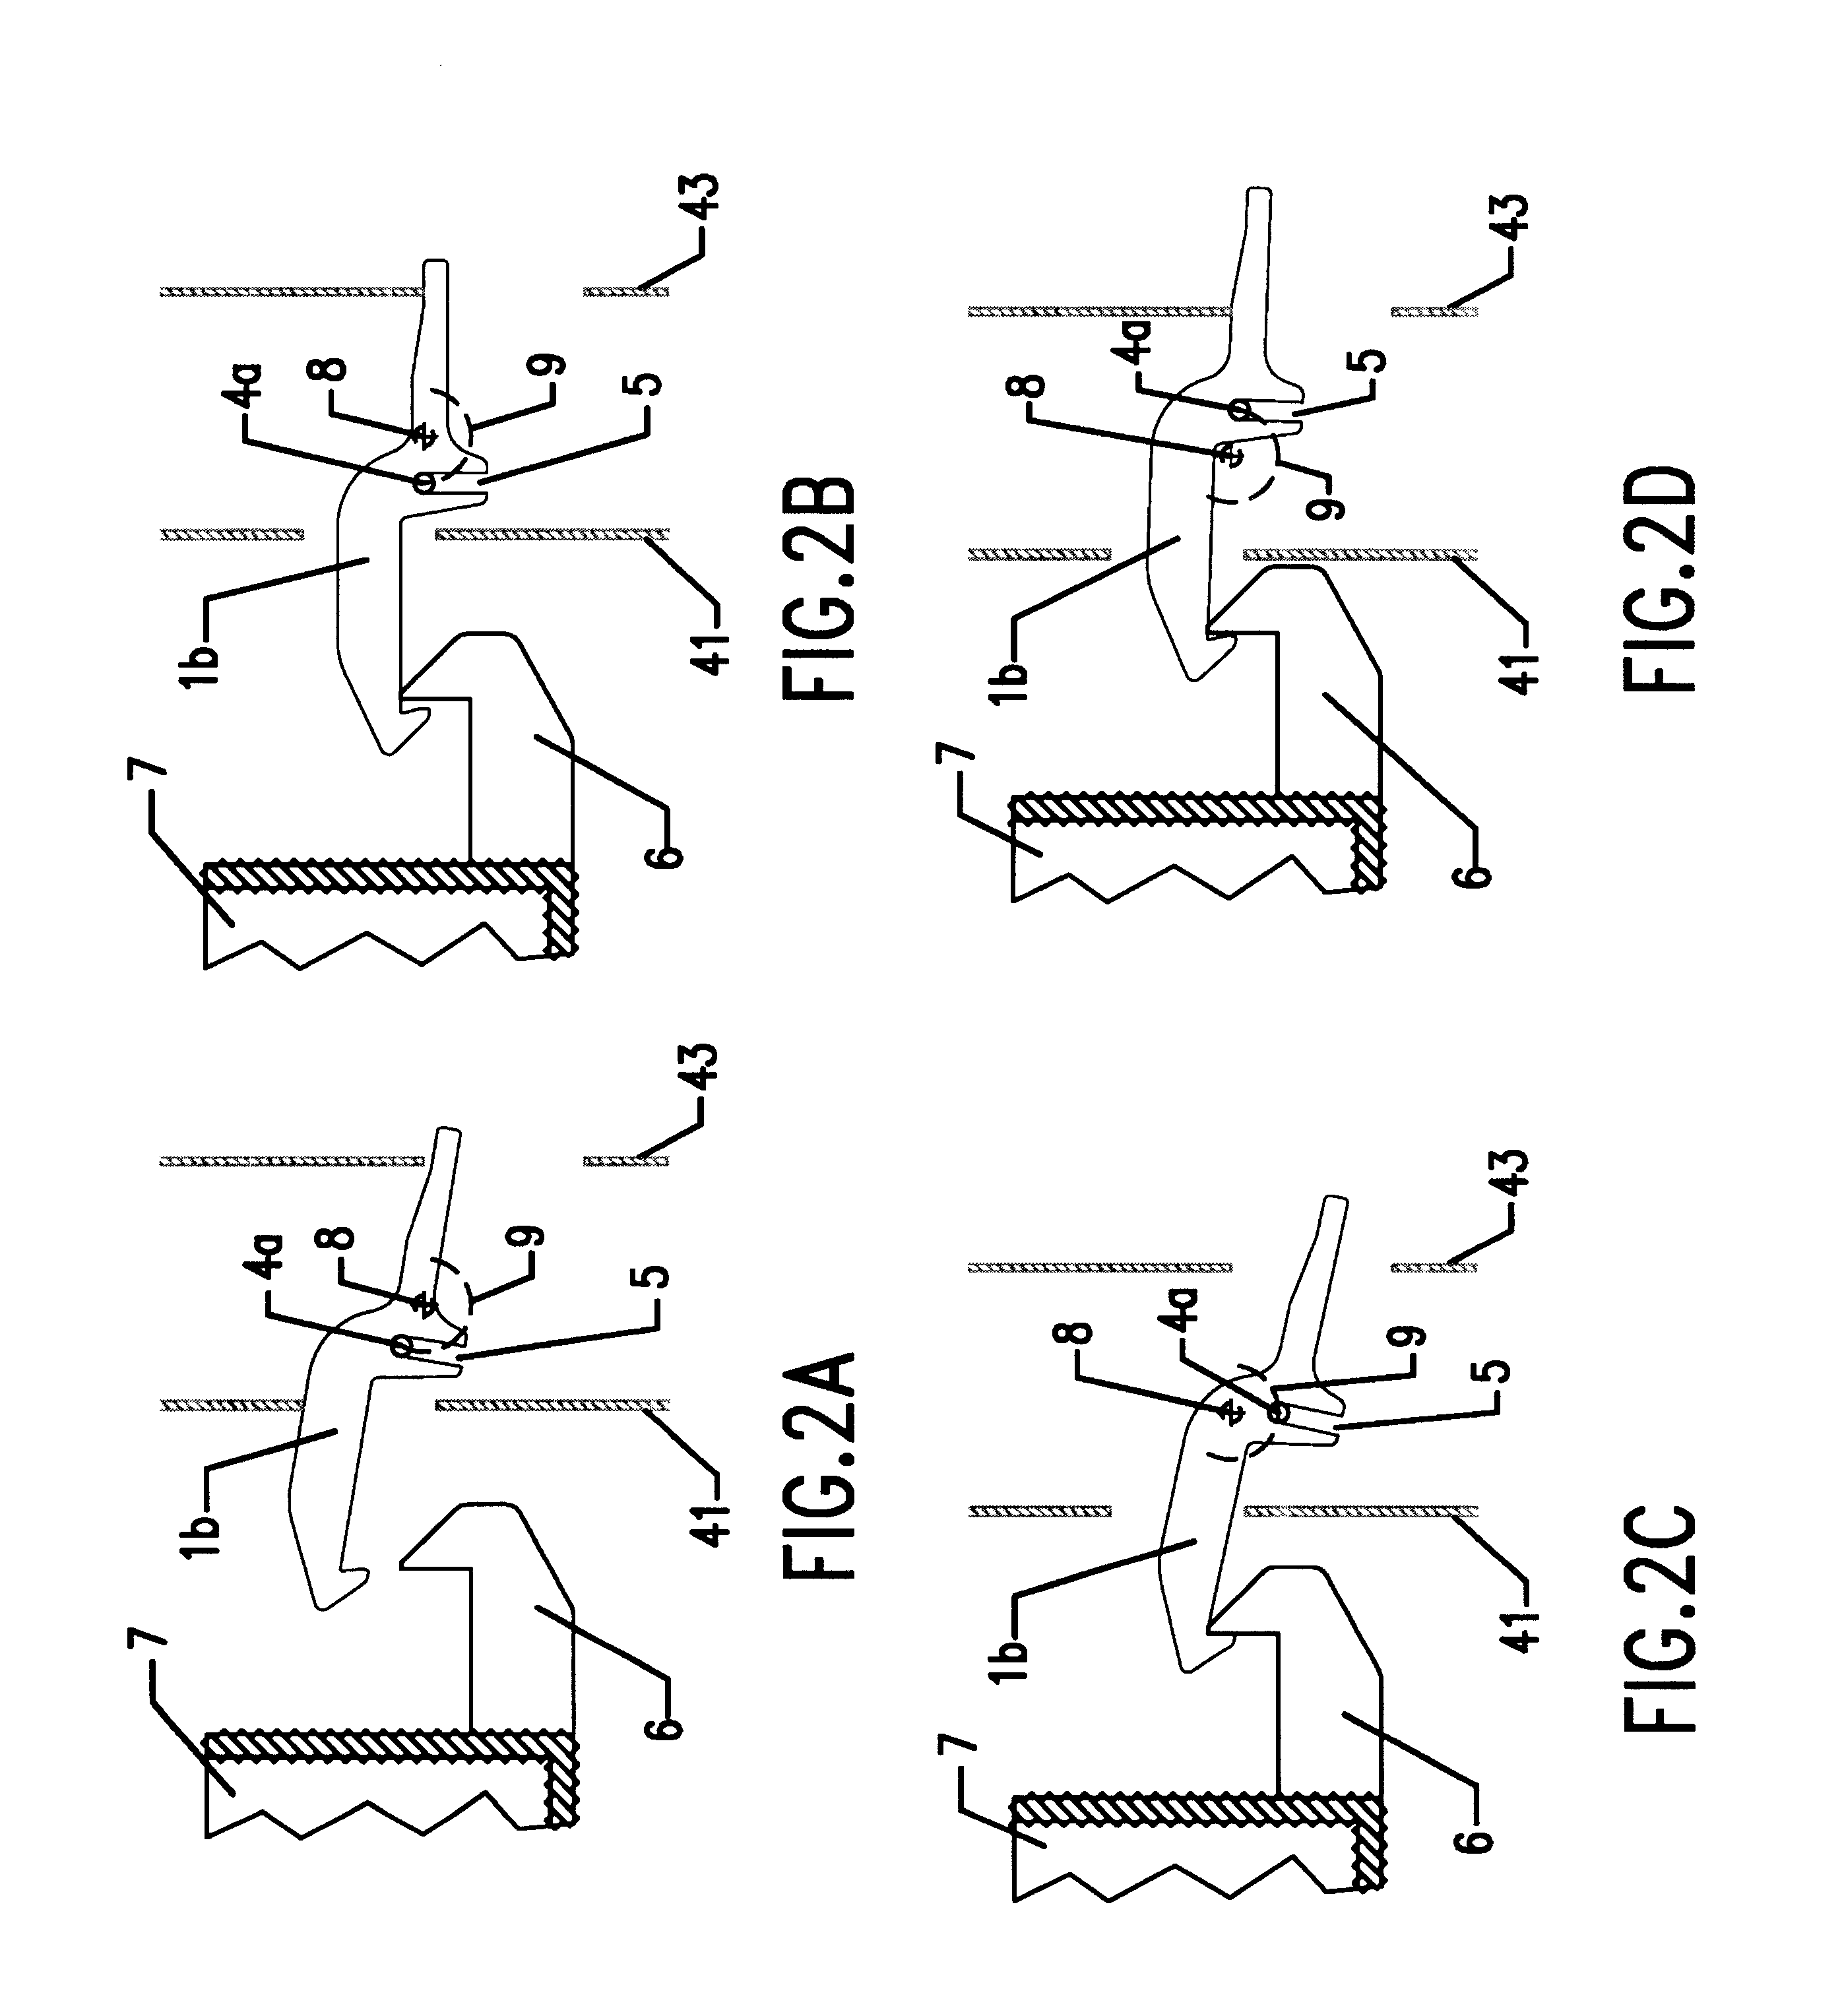 Drawer closing and latching system